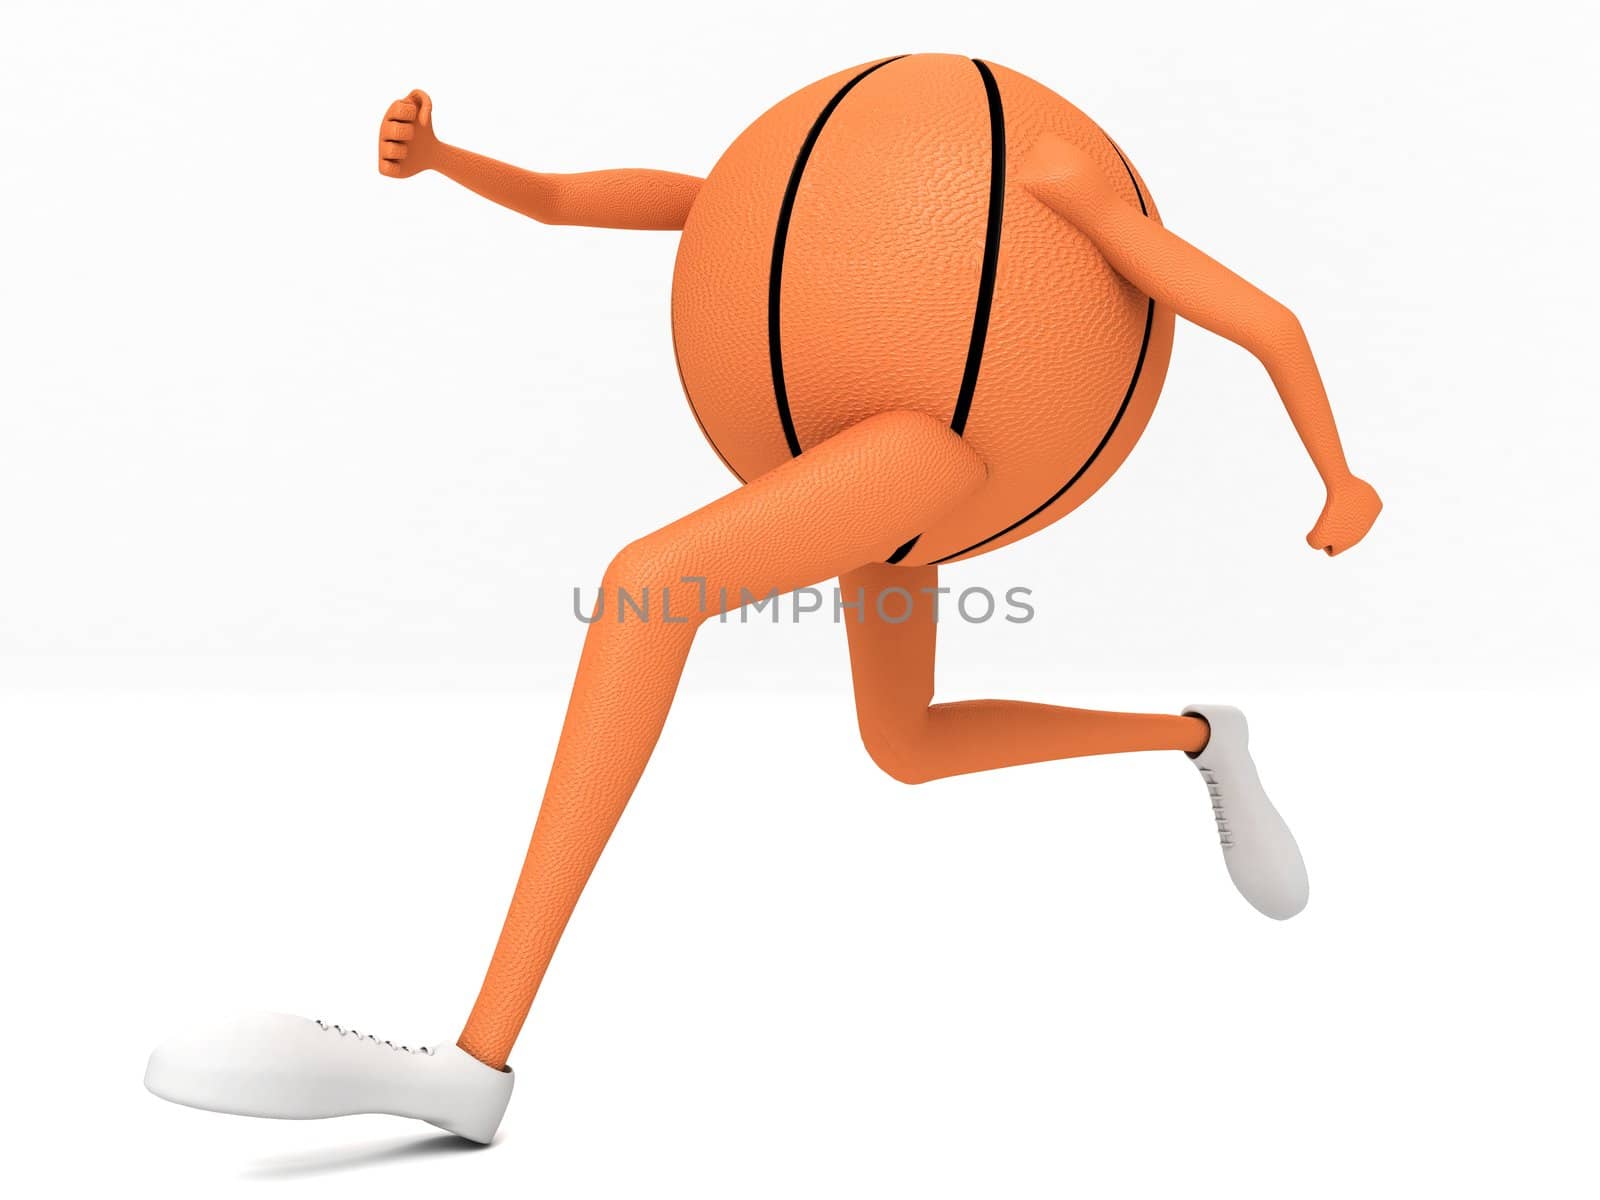 three dimensional view of running basket ball



